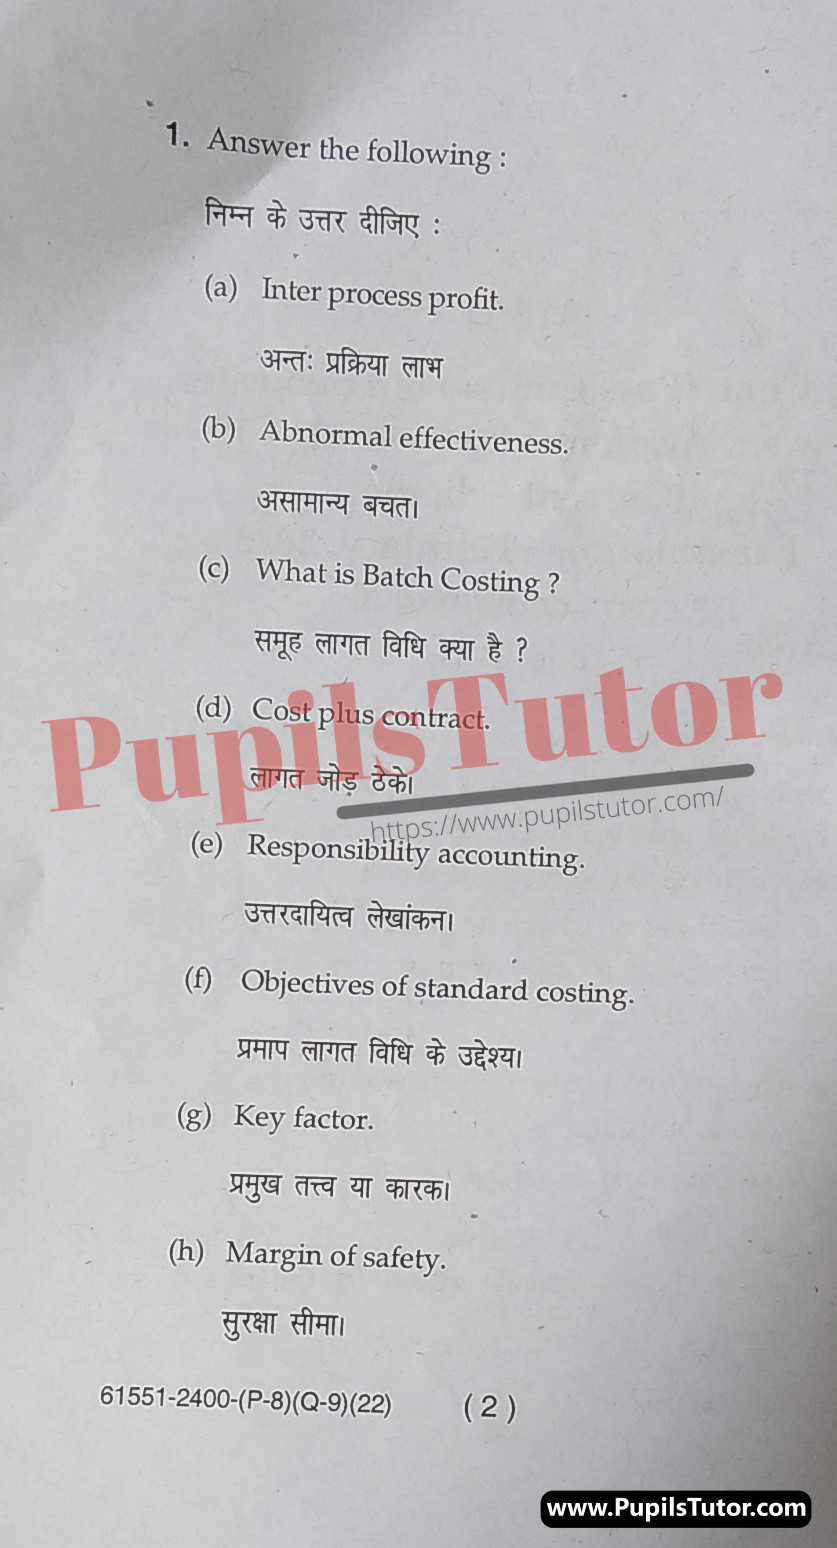 M.D. University B.Com. Cost Accounting - II Sixth Semester Important Question Answer And Solution - www.pupilstutor.com (Paper Page Number 2)